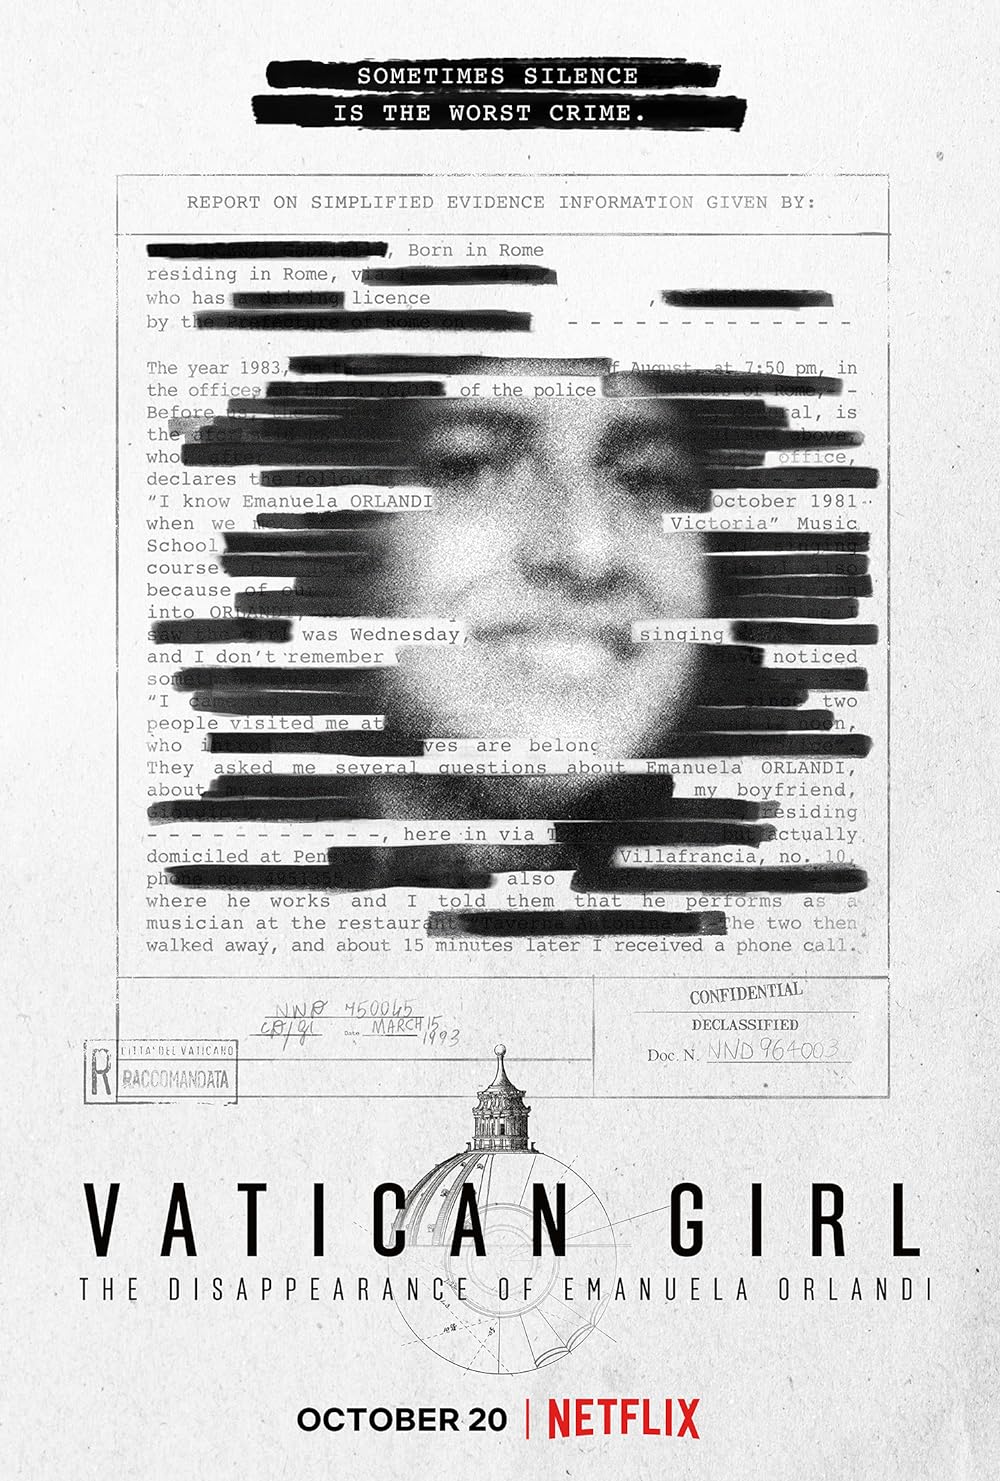 Vatican Girl: The Disappearance of Emanuela Orlandi (2022) S1 EP01&EP04 640Kbps 25Fps 48Khz 5.1Ch DD+ NF E-AC3 Turkish Audio TAC